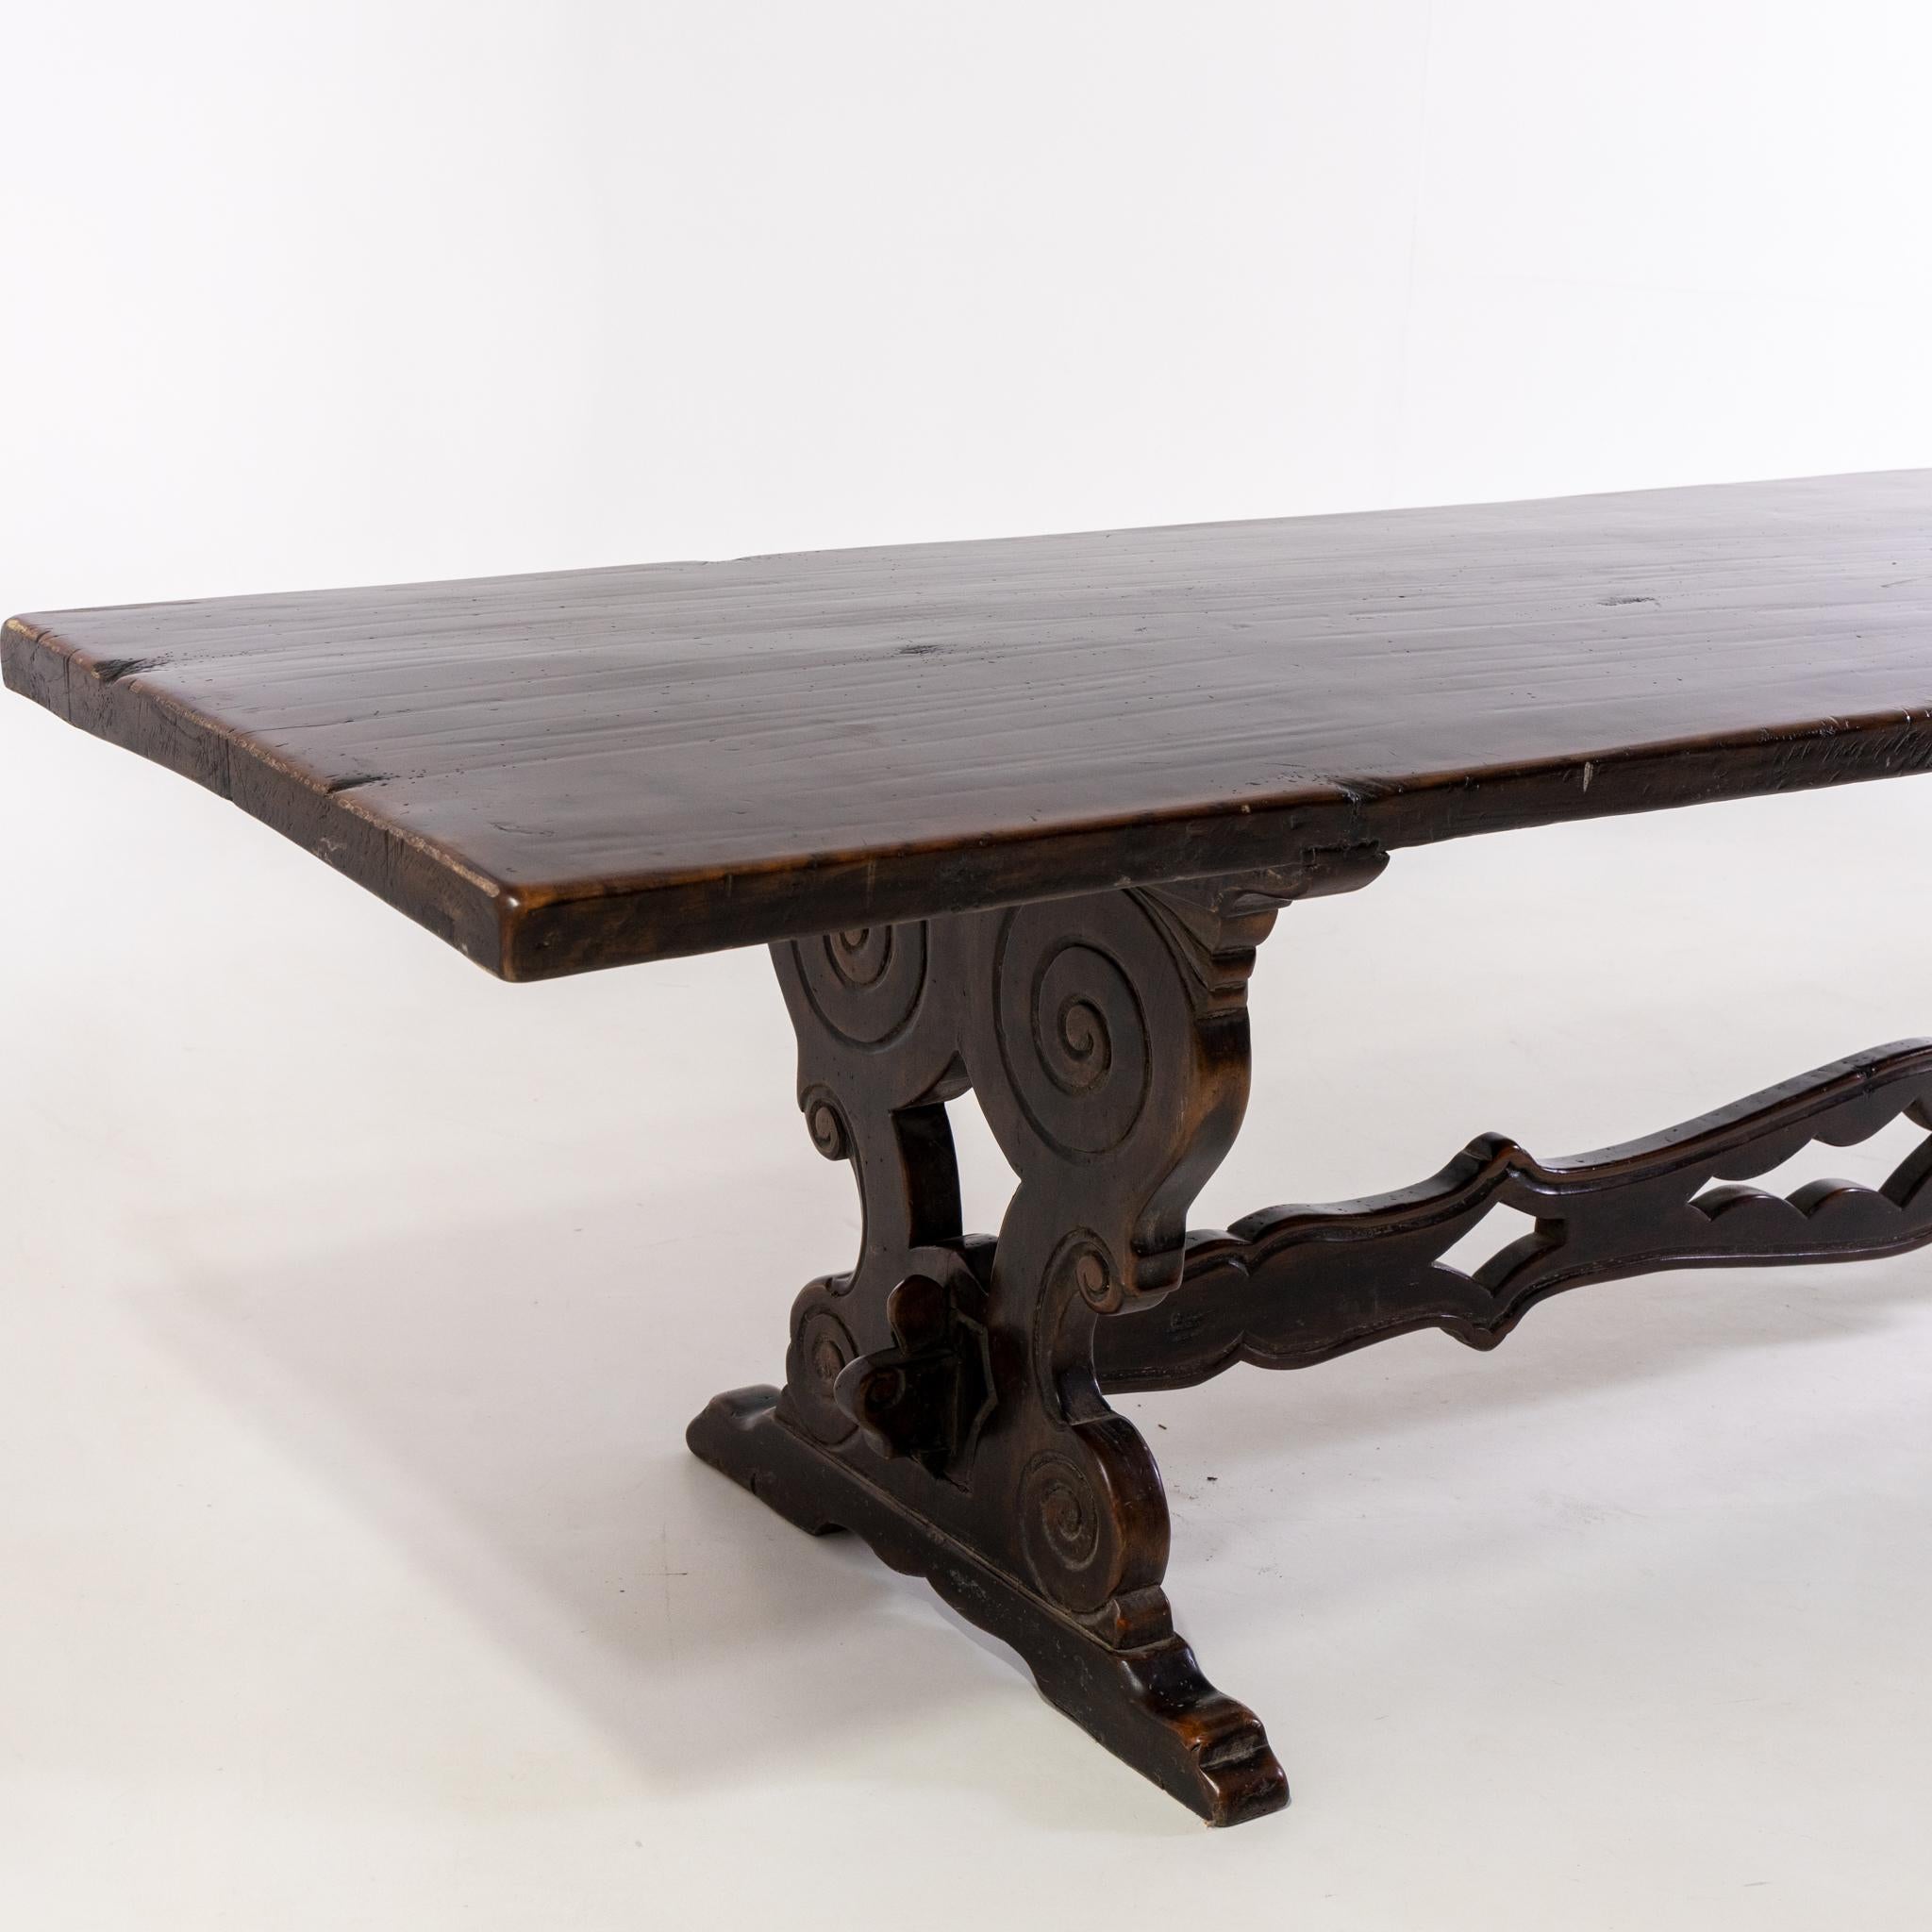 Large refectory table in walnut with beautiful patina and carved intermediate bracing.